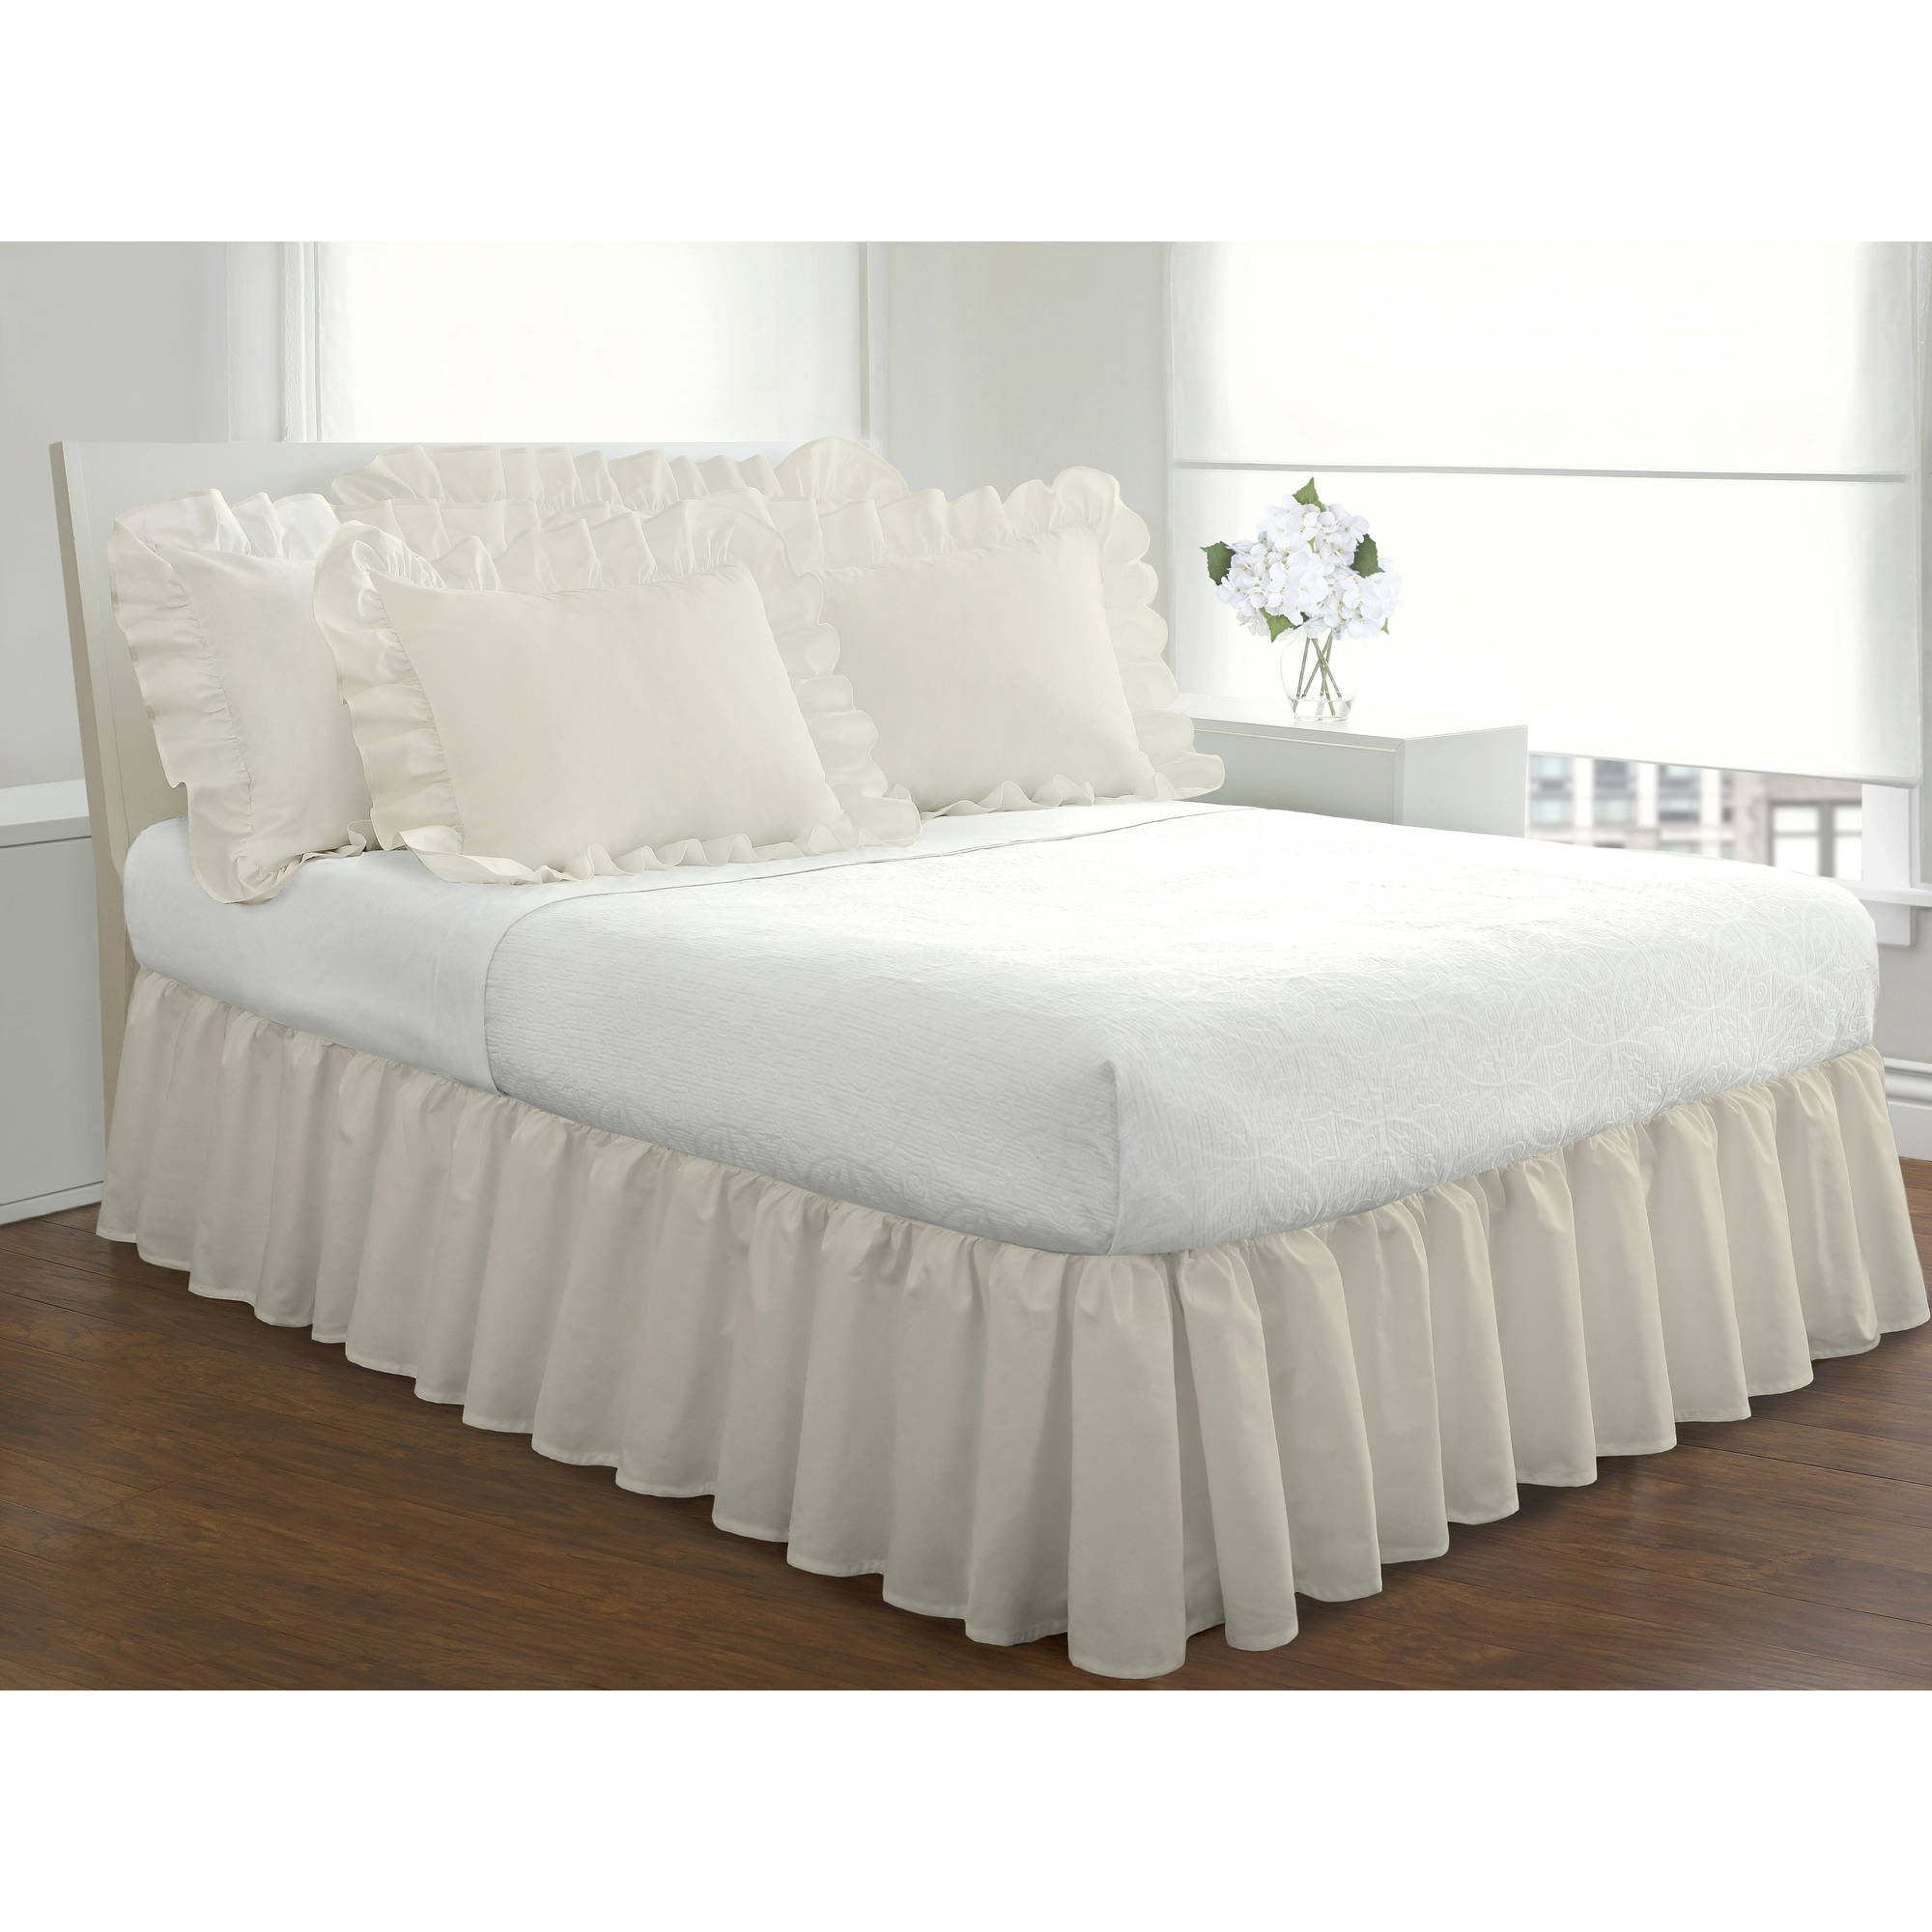 Fresh Ideas Ruffled Poplin Collection Bed Skirt, Queen, Off White ...